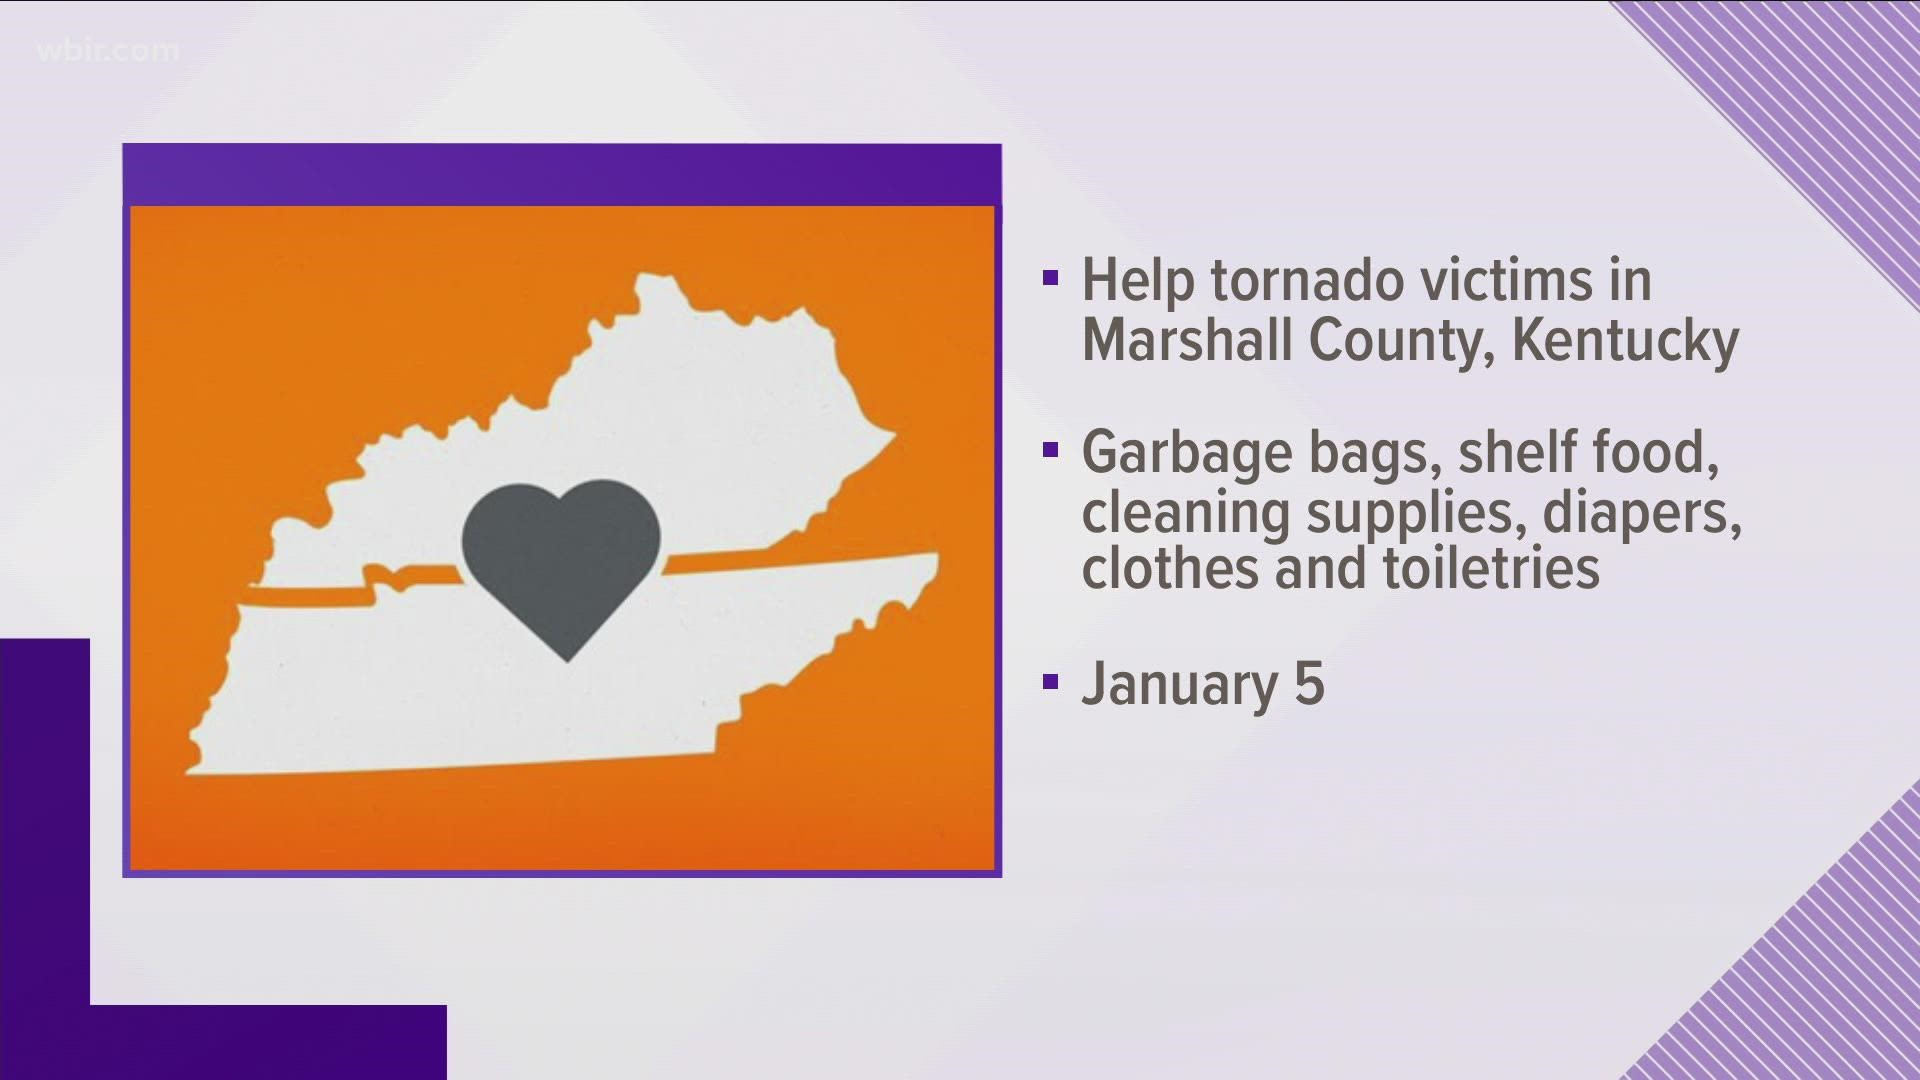 The items needed include garbage bags, shelf food, cleaning supplies, diapers, clothes and toiletries. Items will be collected through Wednesday, Jan. 5.